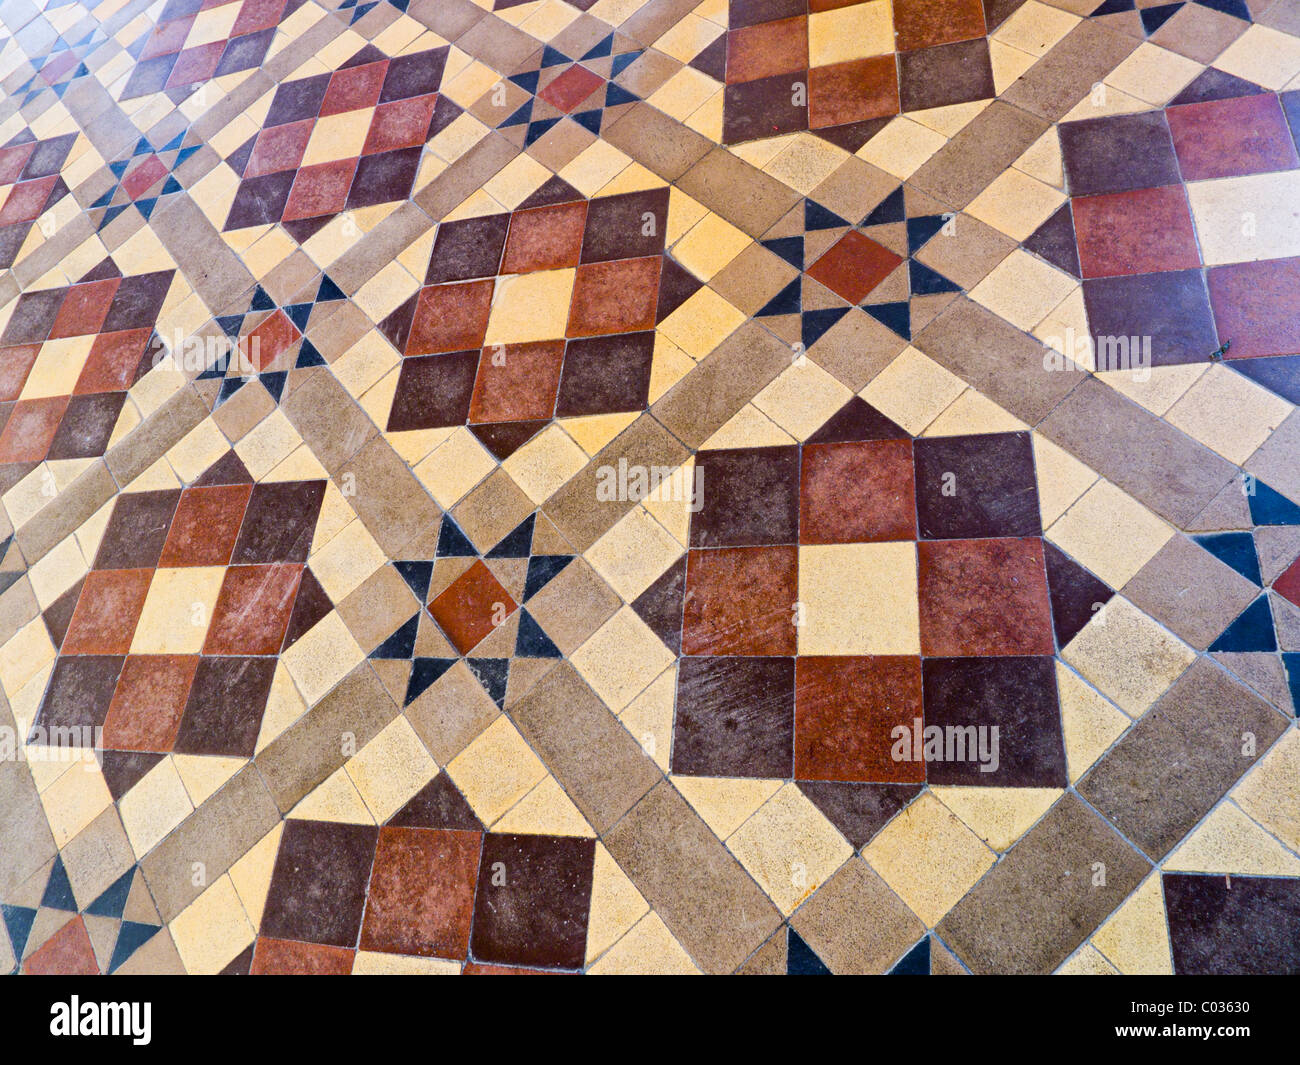 The tiled floor of St. Mary's church at Holme-next-Sea in Norfolk. Stock Photo